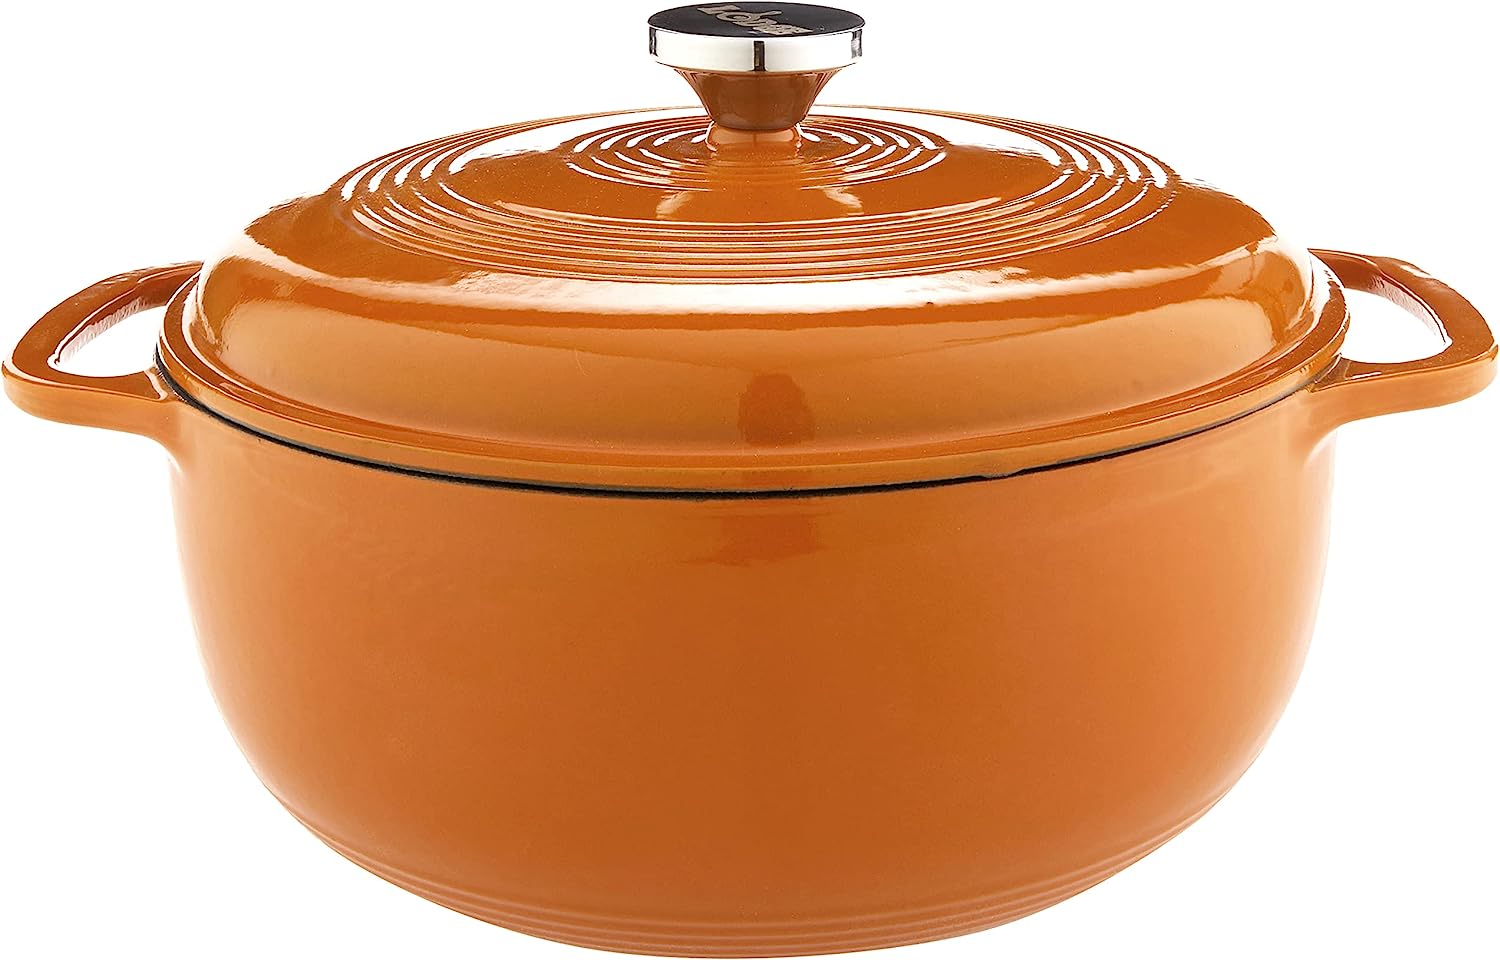 https://bigbigmart.com/wp-content/uploads/2023/07/Lodge-6-Quart-Enameled-Cast-Iron-Dutch-Oven-with-Lid-%E2%80%93-Dual-Handles-%E2%80%93-Oven-Safe-up-to-500%C2%B0-F-or-on-Stovetop-Use-to-Marinate-Cook-Bake-Refrigerate-and-Serve-%E2%80%93-Apricot1.jpg